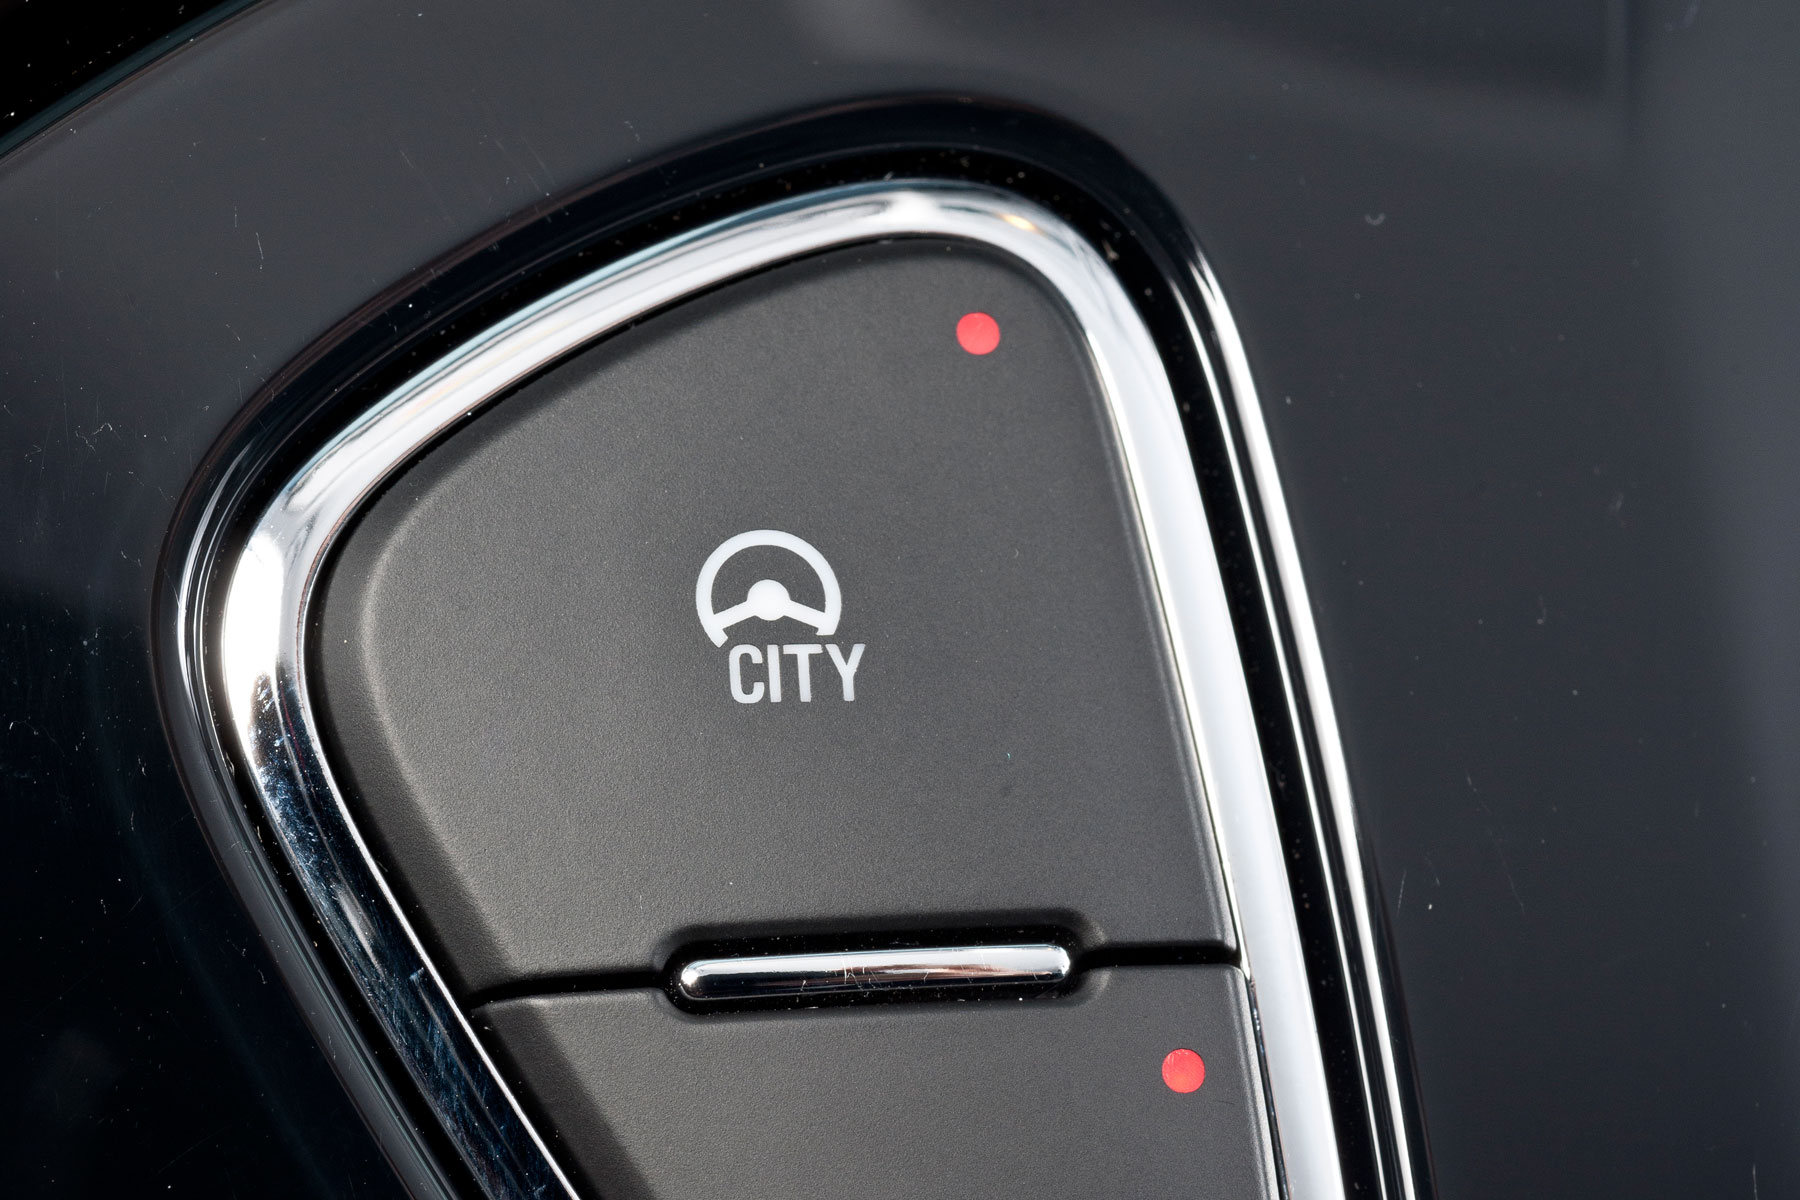 Is the Vauxhall Corsa's city steering pointless?